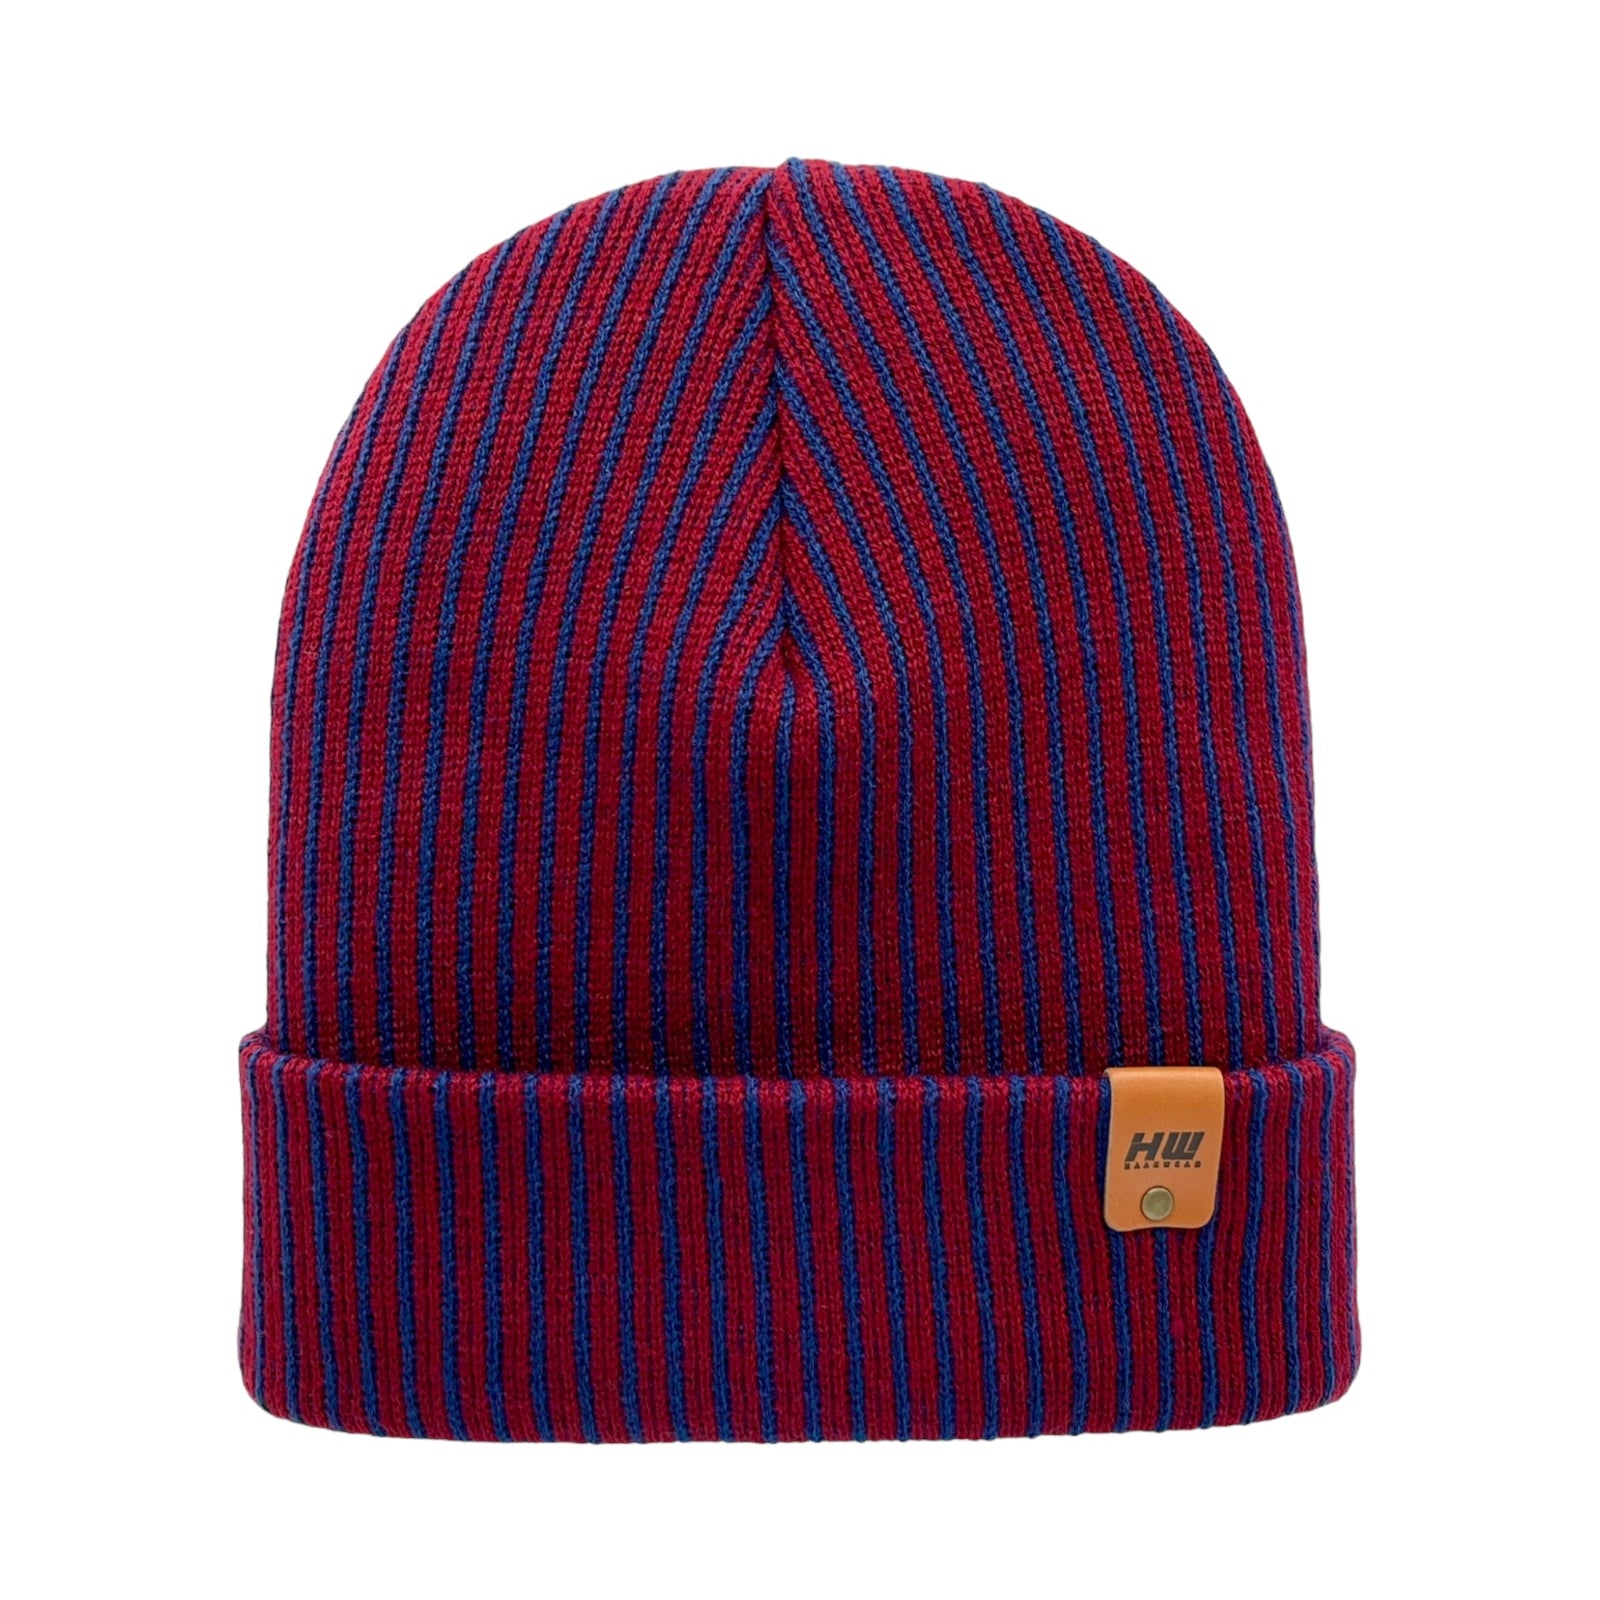 HAAKWEAR Cuffed Wide Ribbed Striped Beanie, Limited Edition, Blue/Maroon, Made in USA